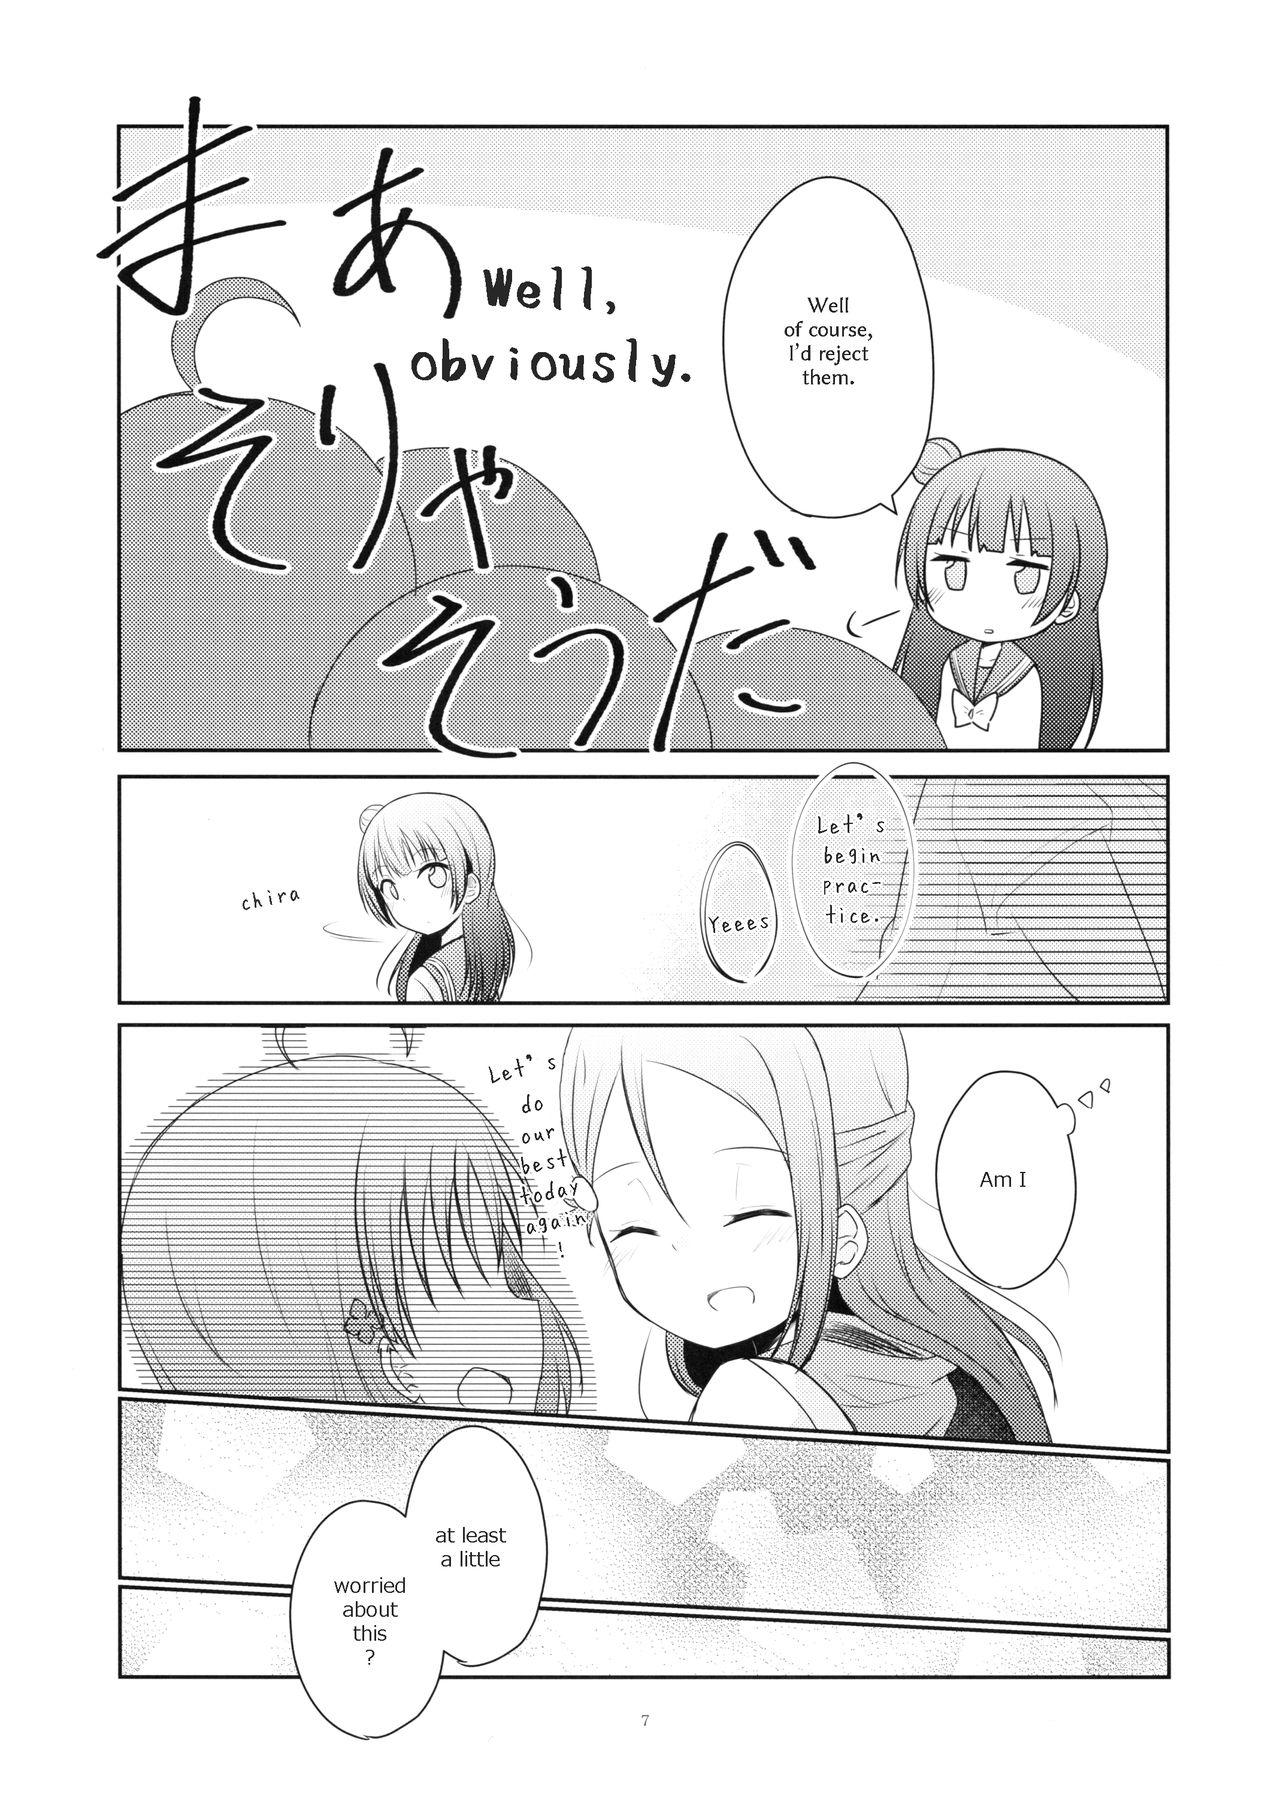 Plump Even if I Don't Become an Angel or Anything - Love live sunshine Massage Creep - Page 7